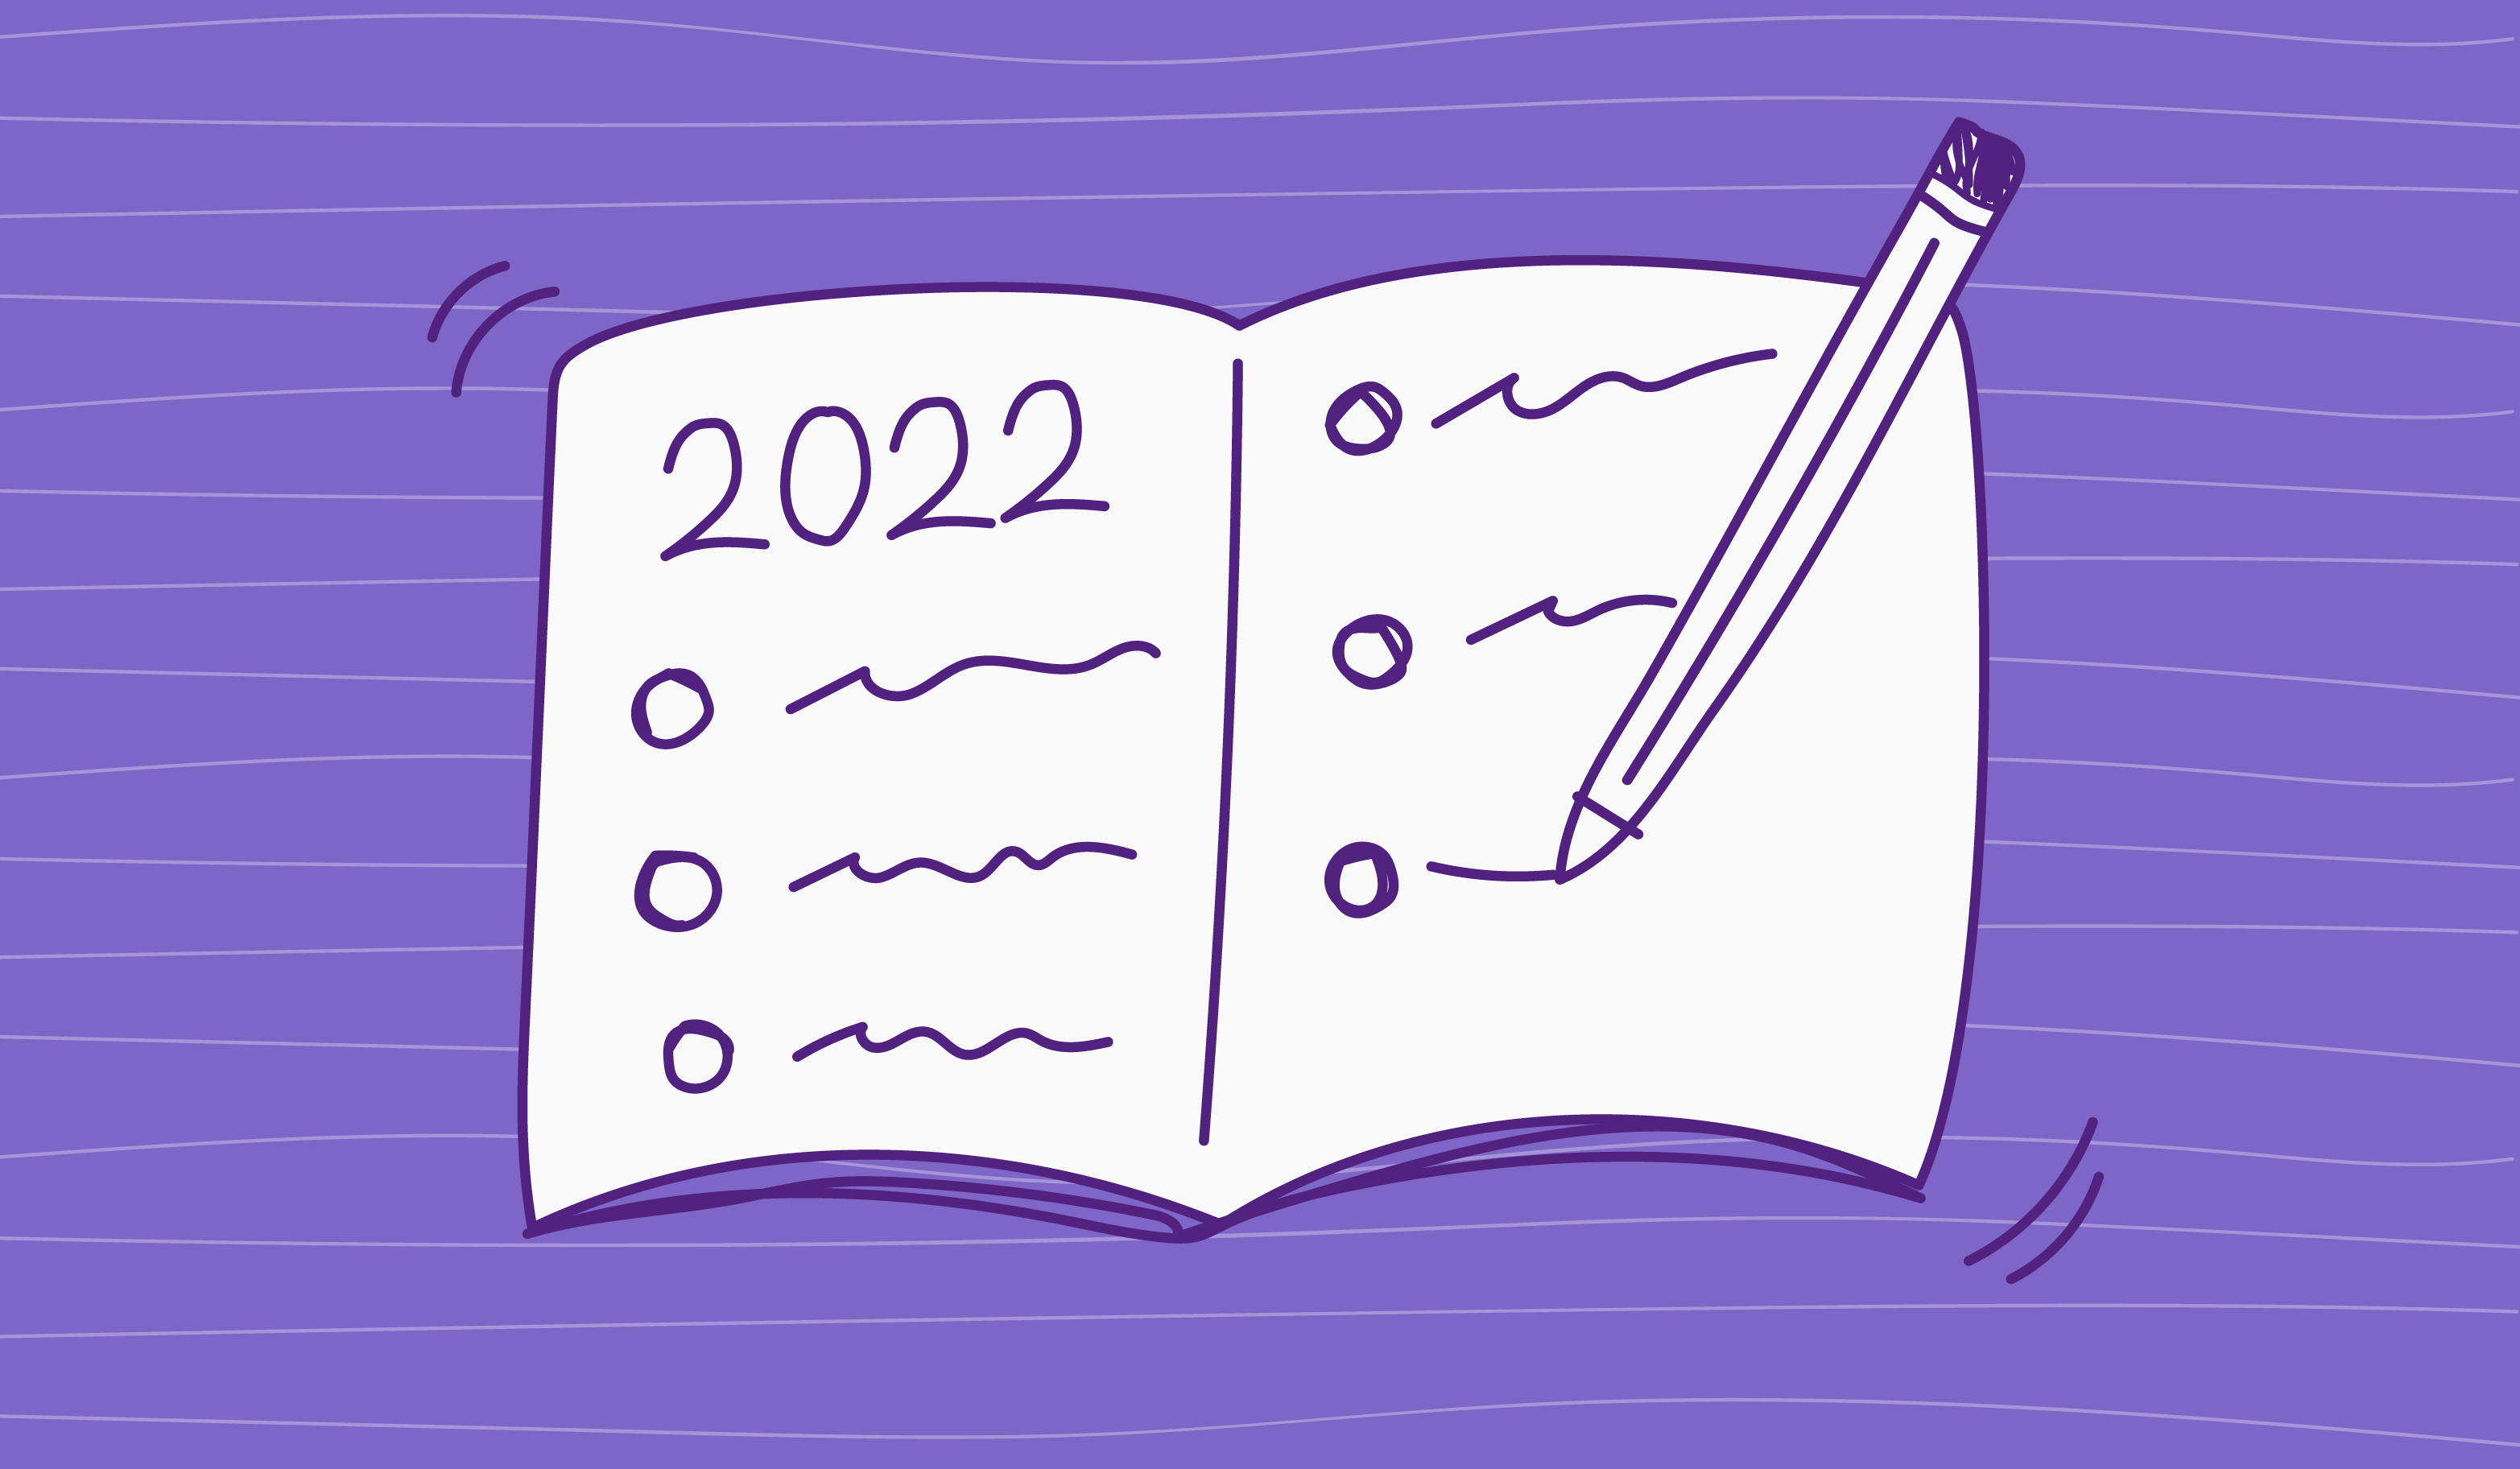 5 Product Information Management Resolutions For SMBs to Make in 2022